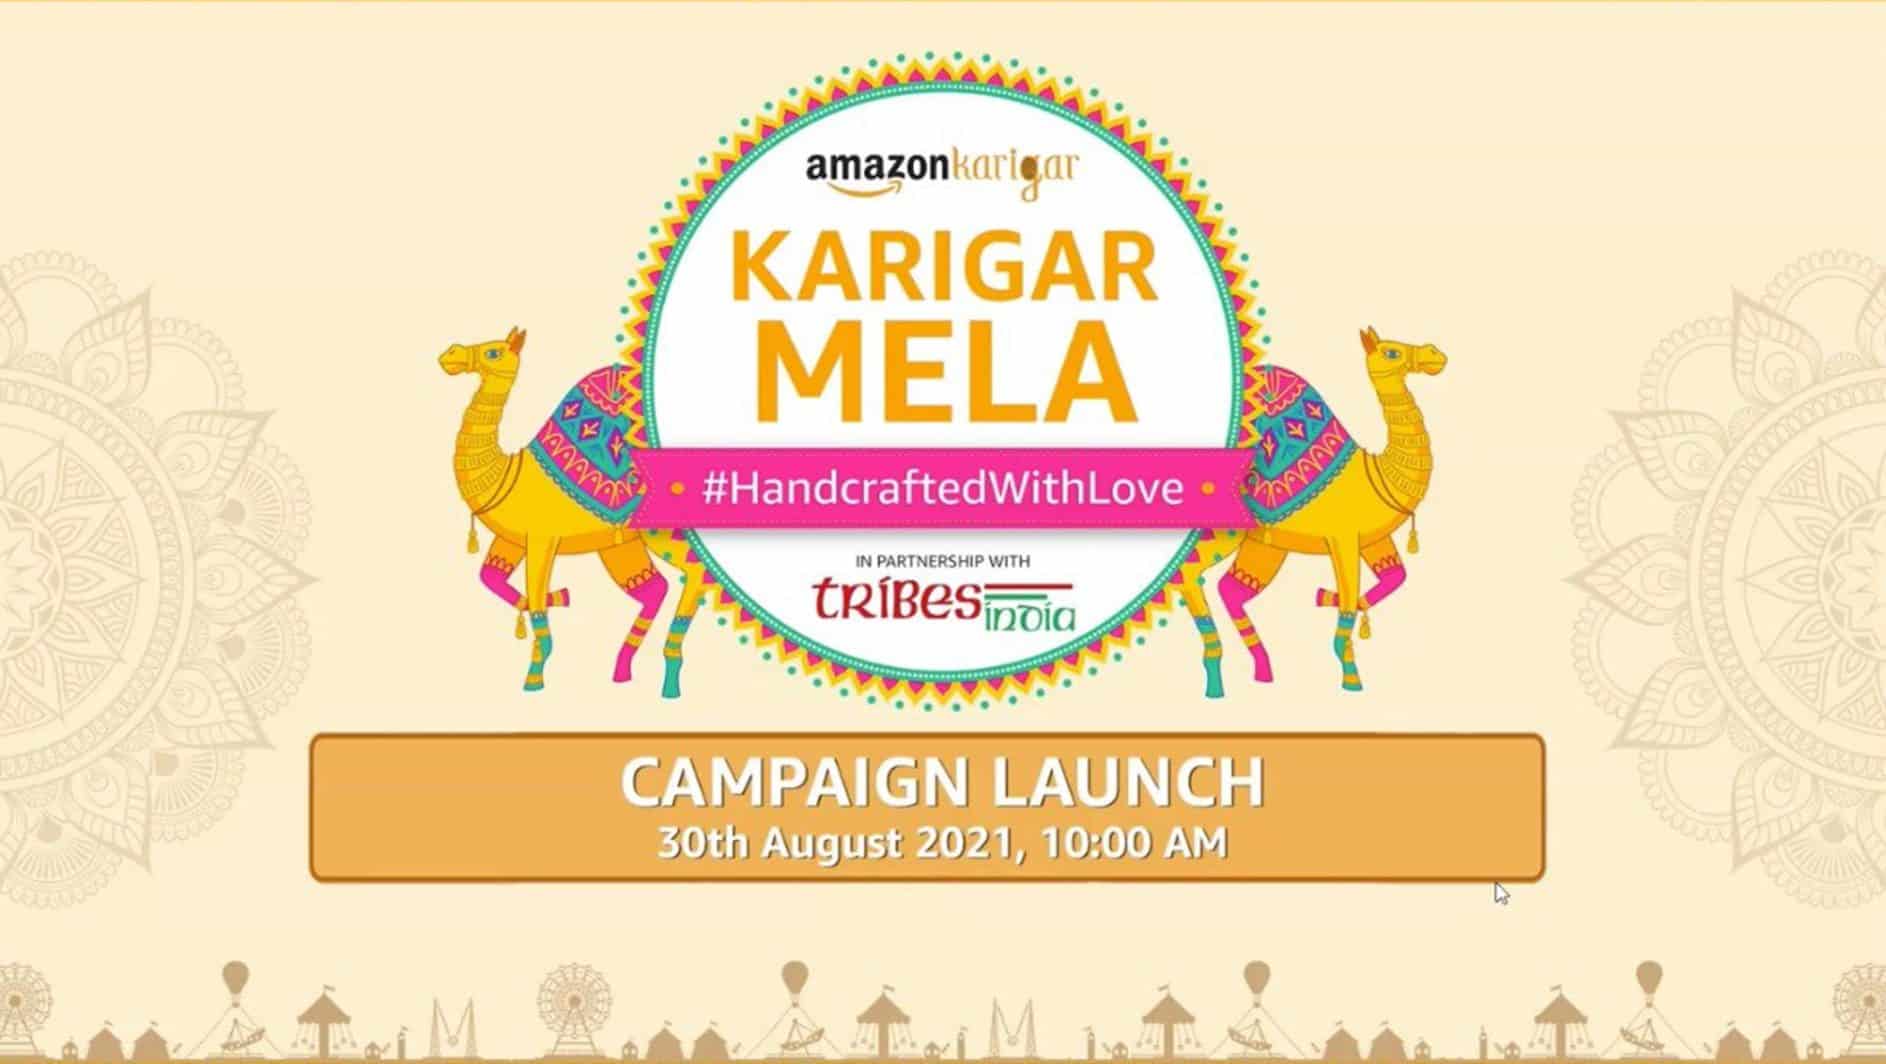 Amazon India launches Karigar Mela in partnership with Tribes India